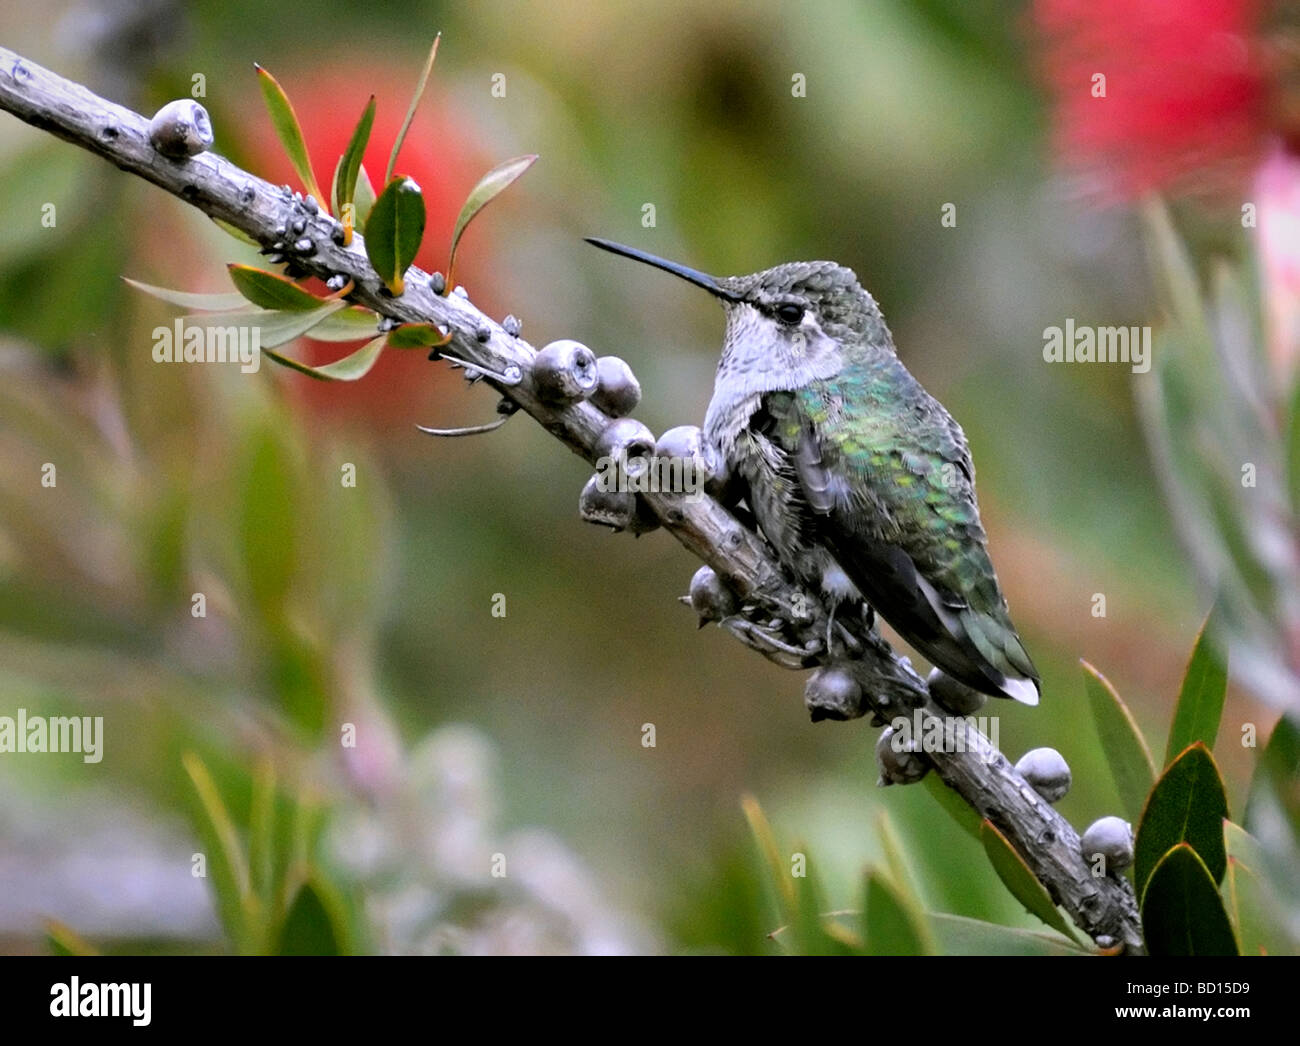 Anna's Hummingbird (Calypte anna) perched on a branch, pictured against a blurred background Stock Photo